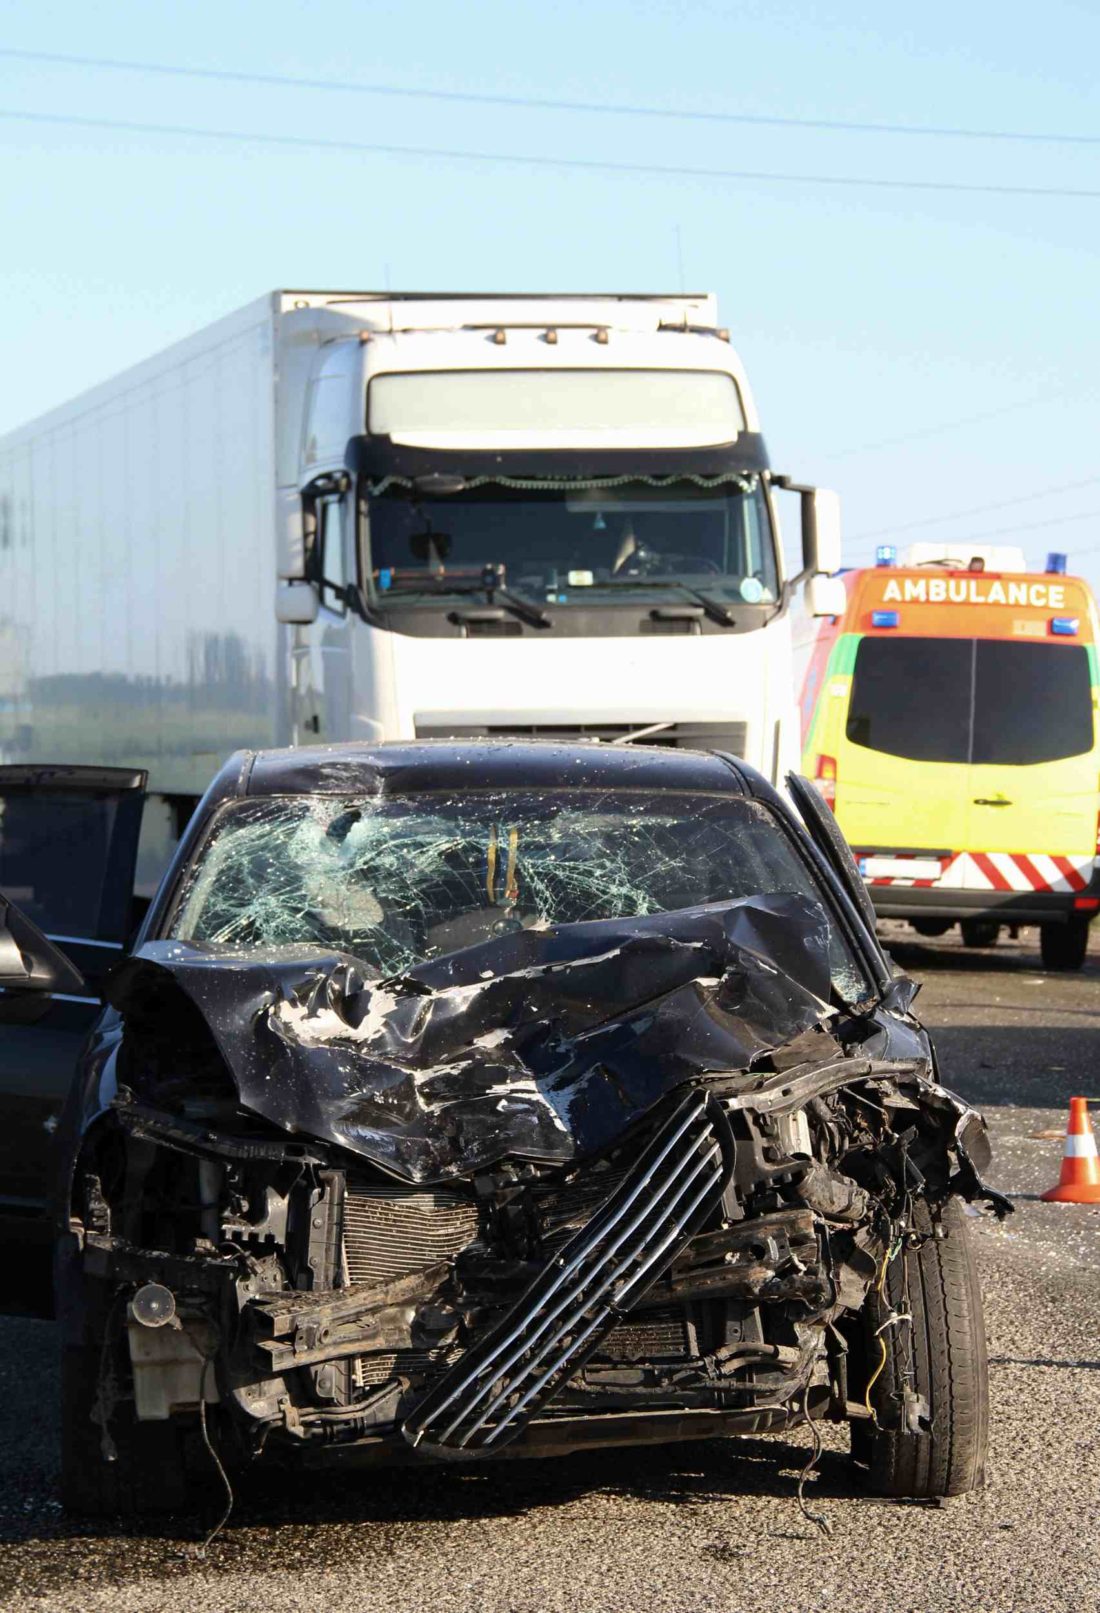 What You Shouldn't Ignore After a Truck-Car Collision